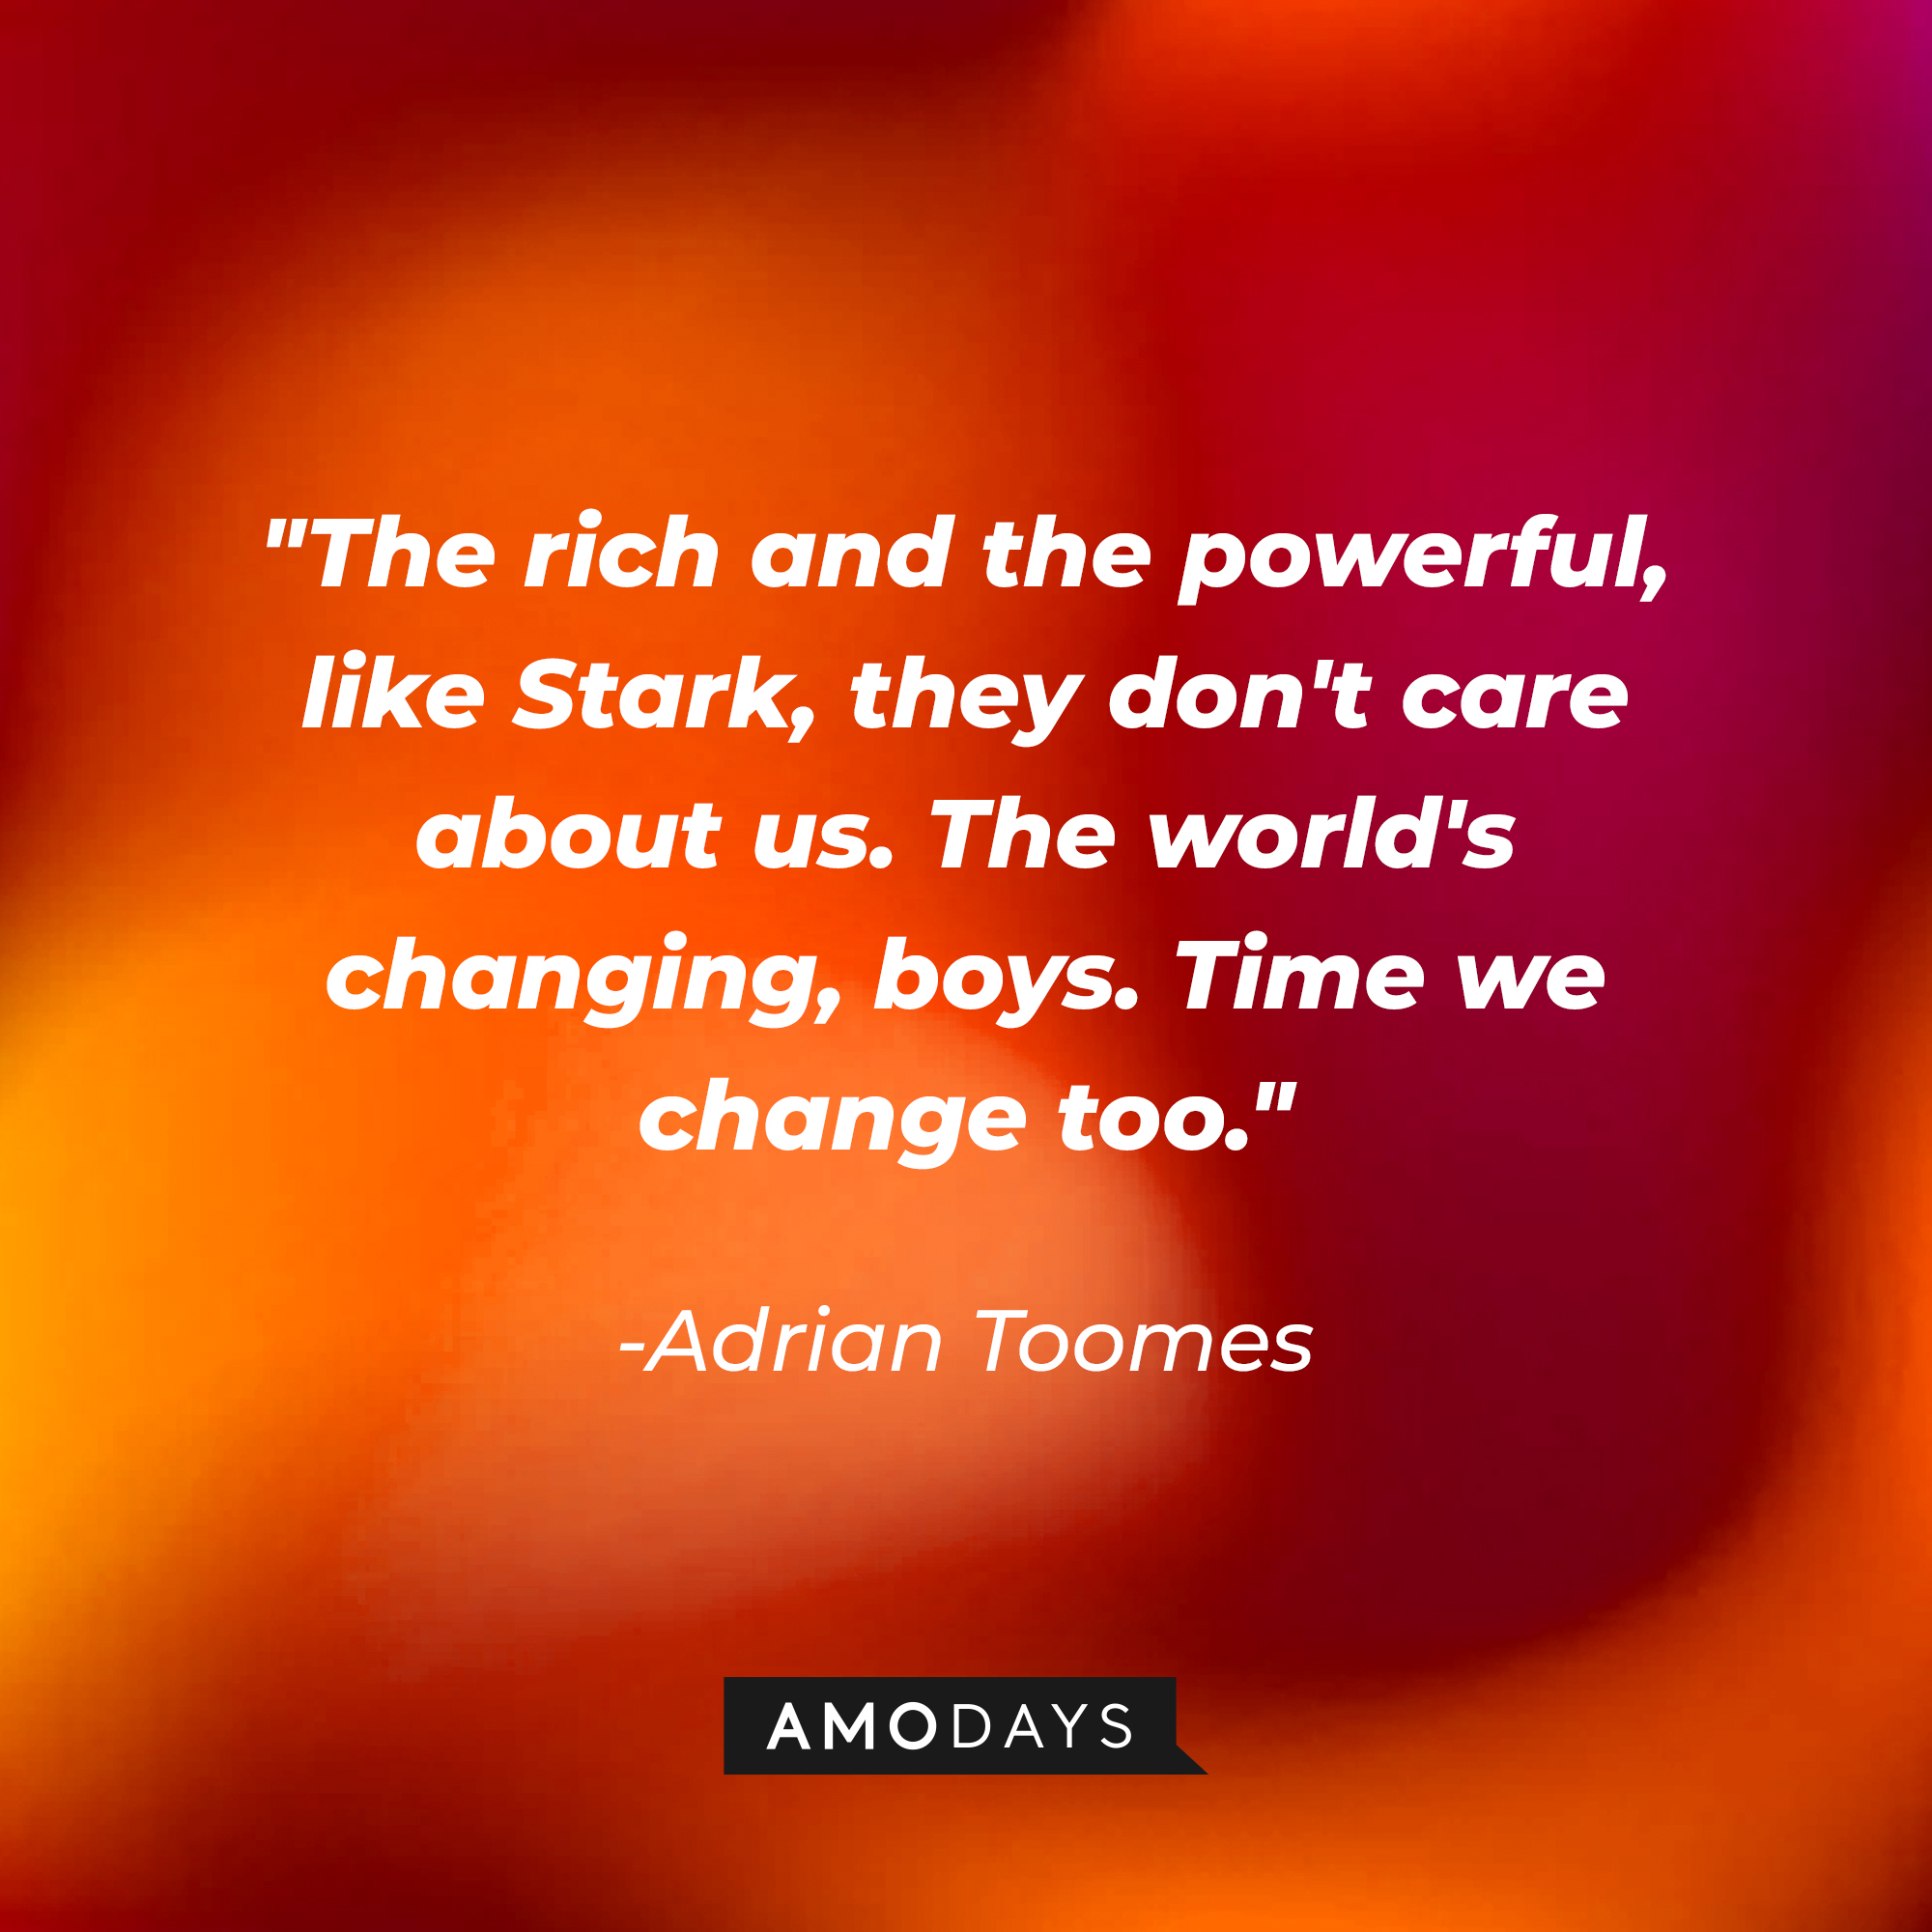 Adrian Toomes’ quote: The rich and the powerful, like Stark, they don't care about us. The world's changing, boys. Time we change too. | Image AmoDays